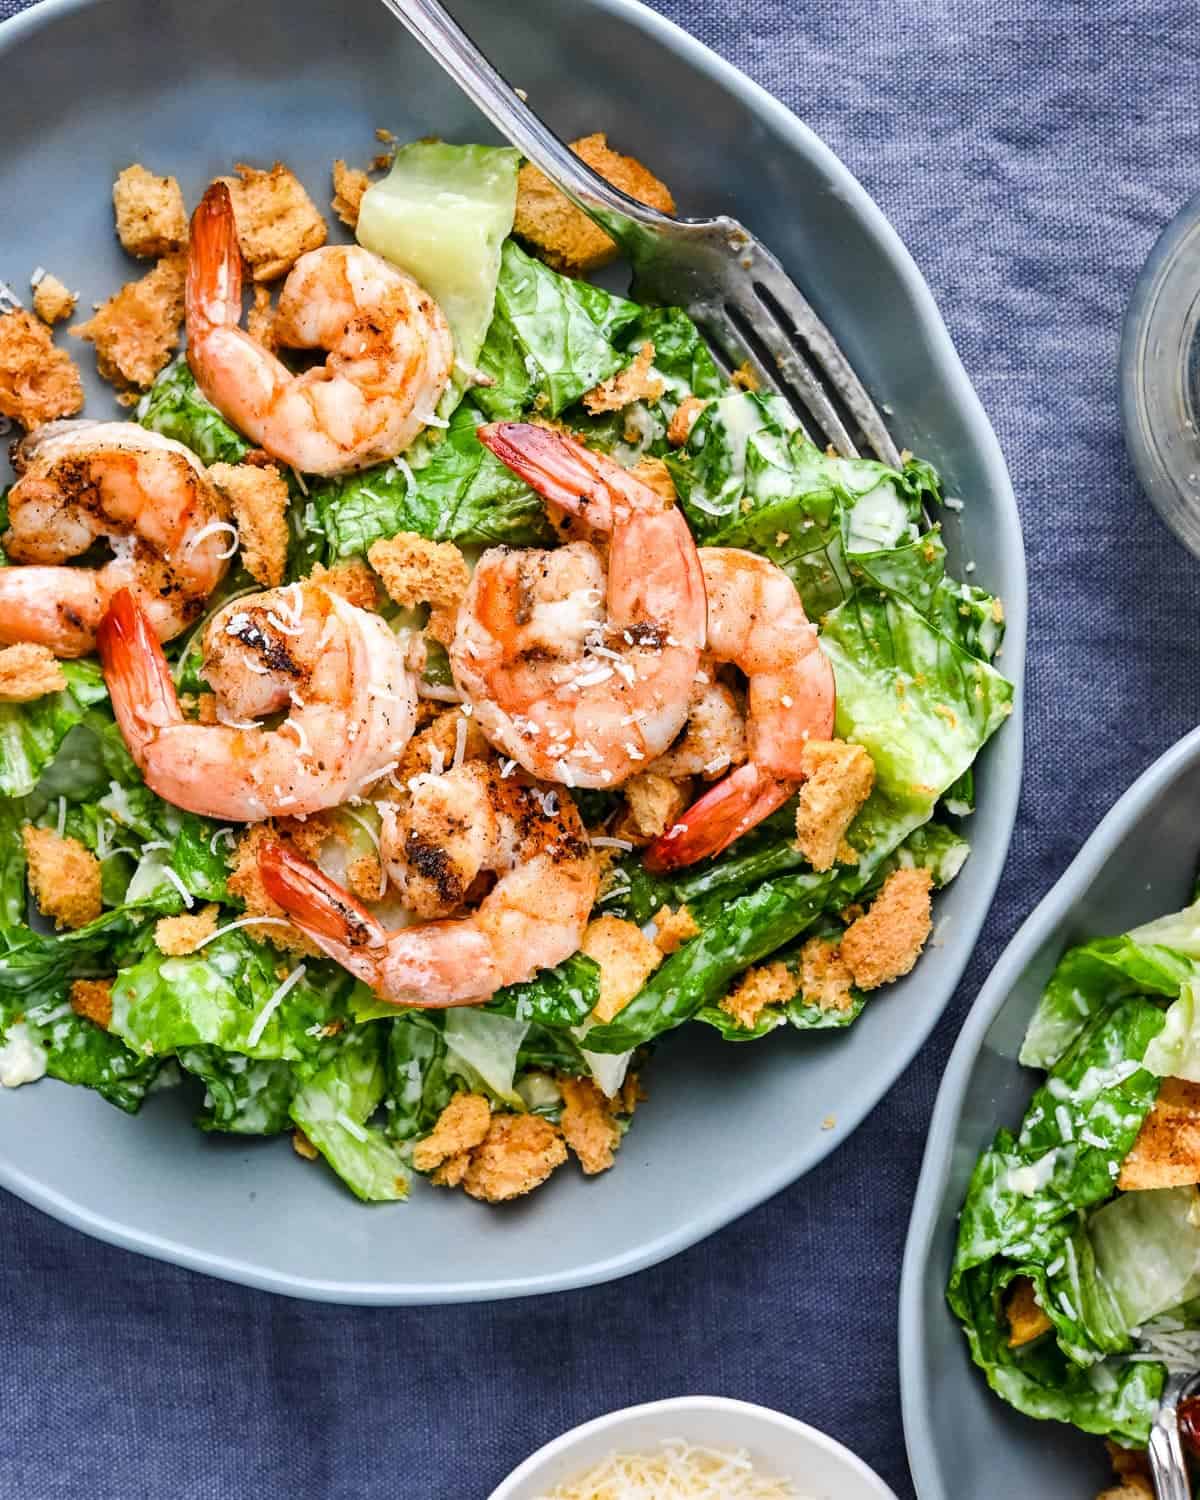 A Grilled Shrimp Caesar Salad in a blue bowl with a fork in it.